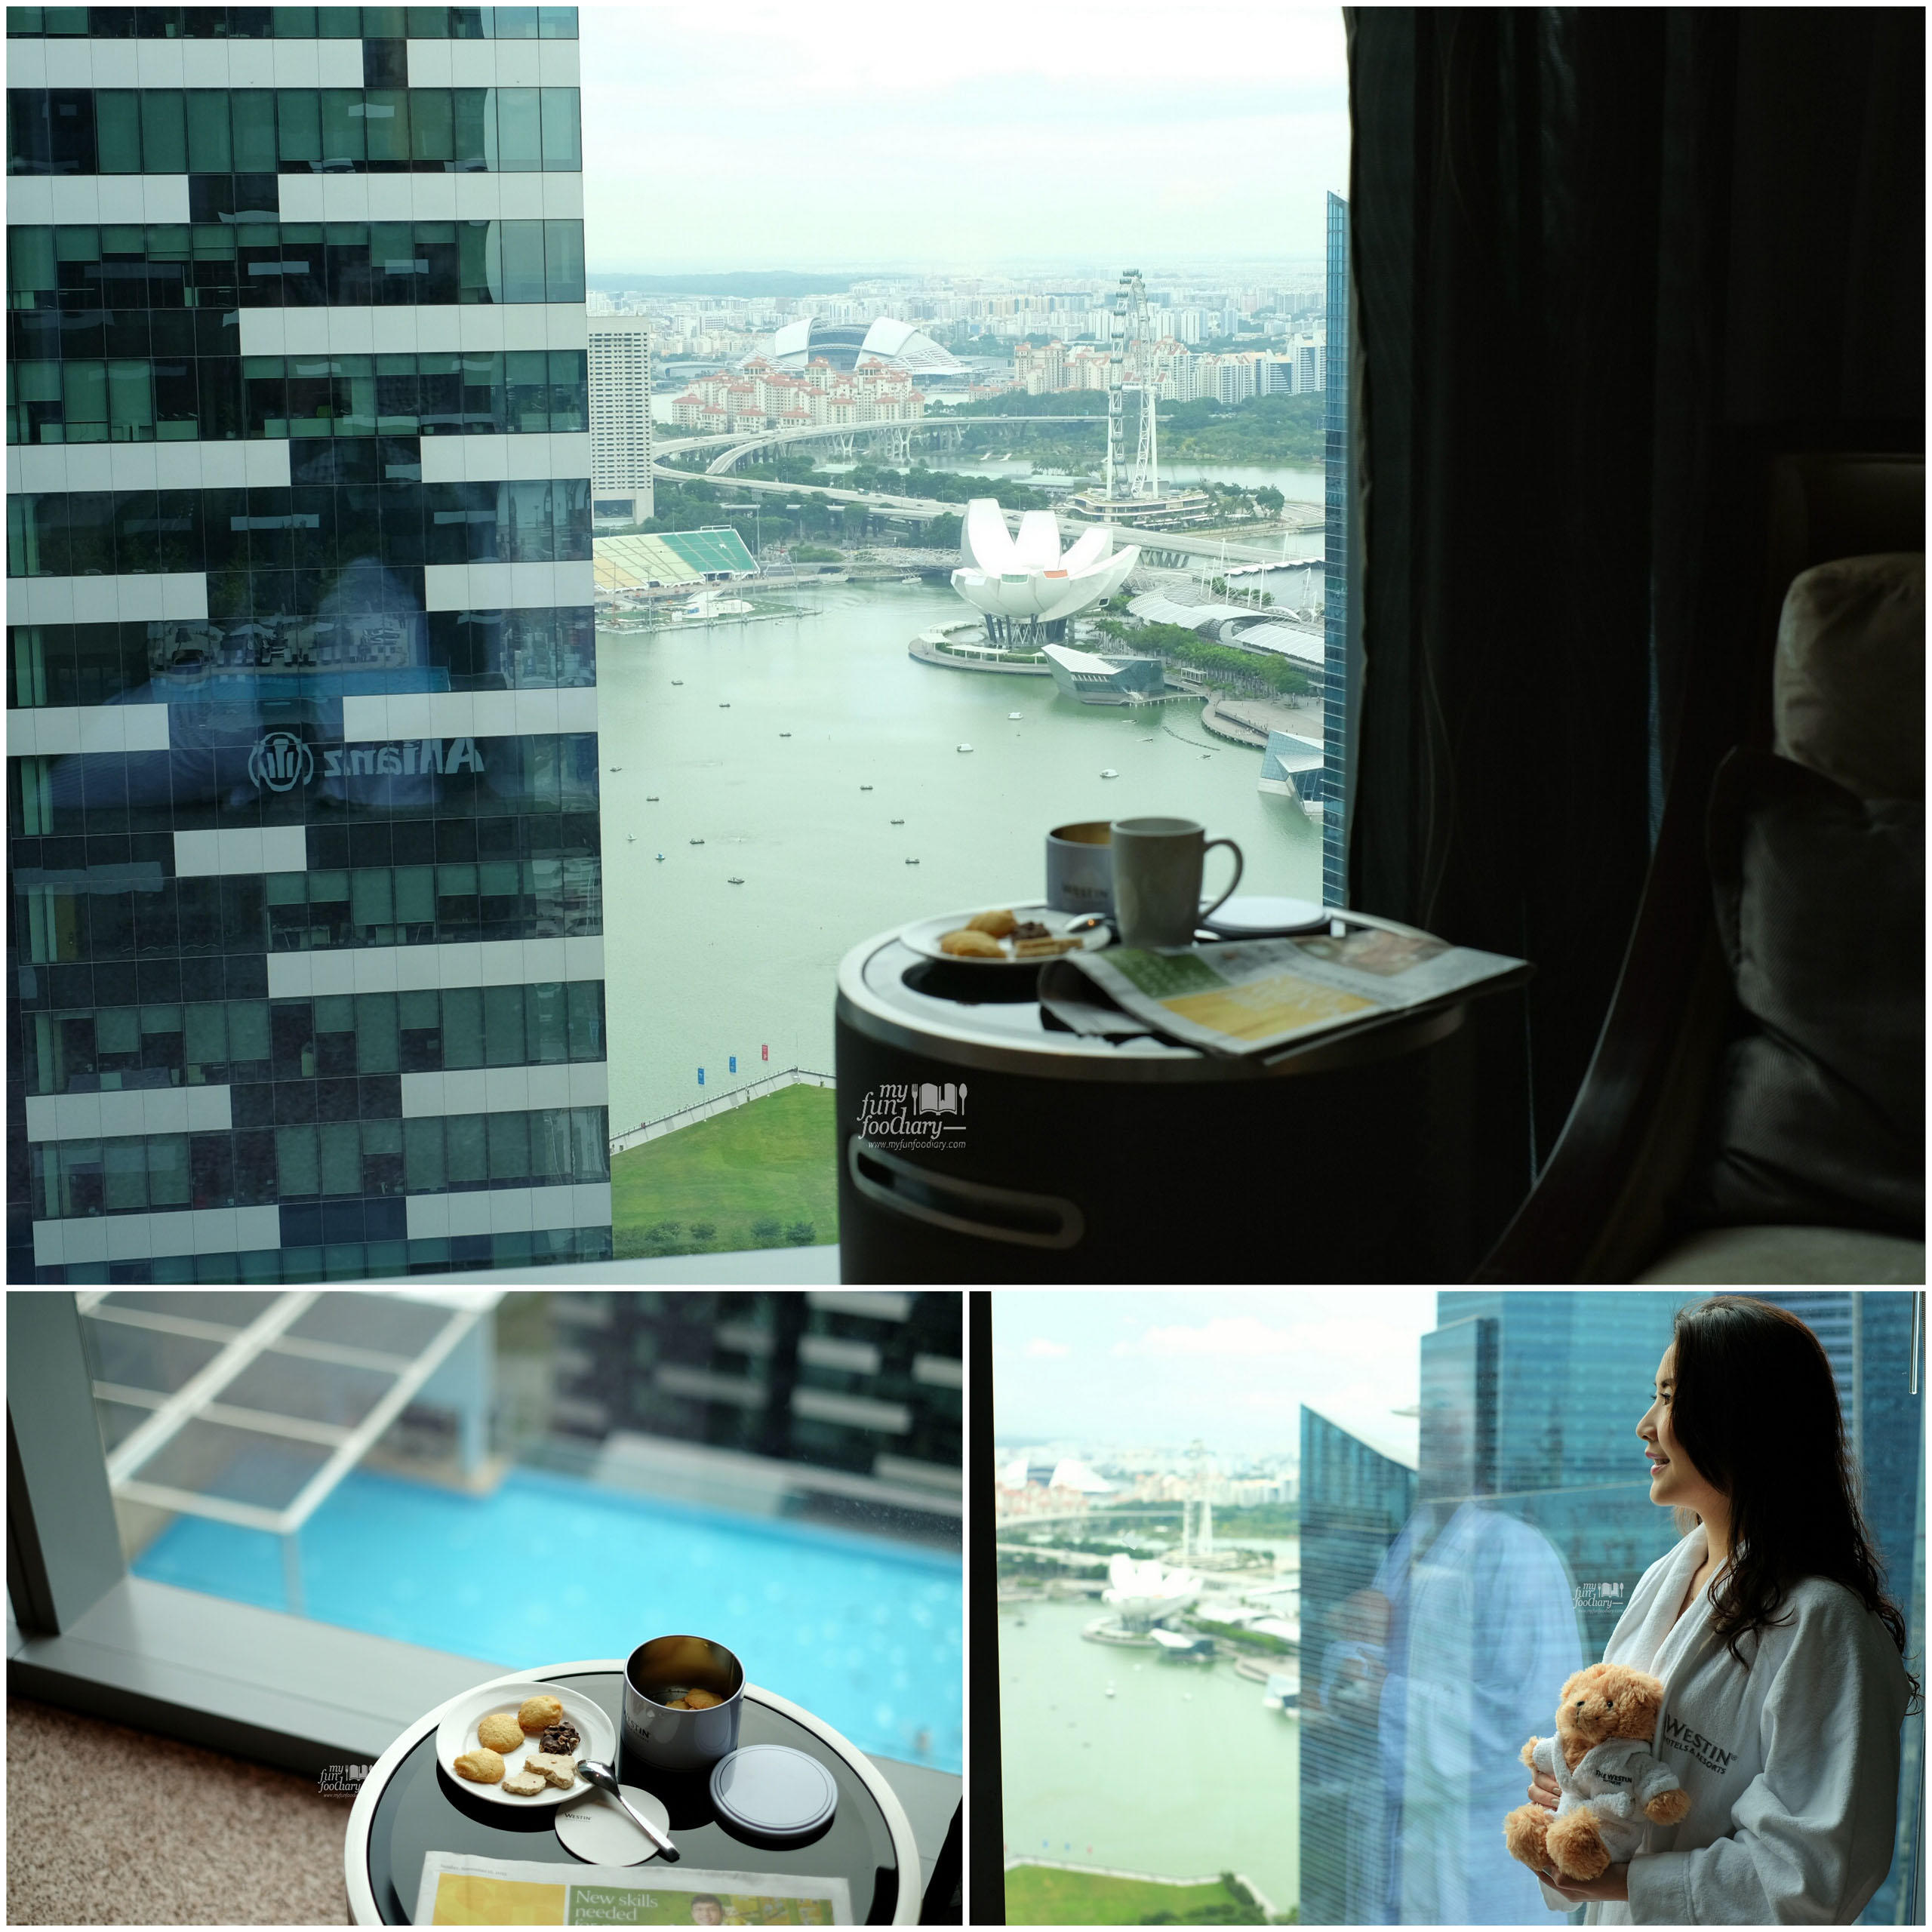 Stunning View to Marina Bay from my room at Westin Singapore by Myfunfoodiary